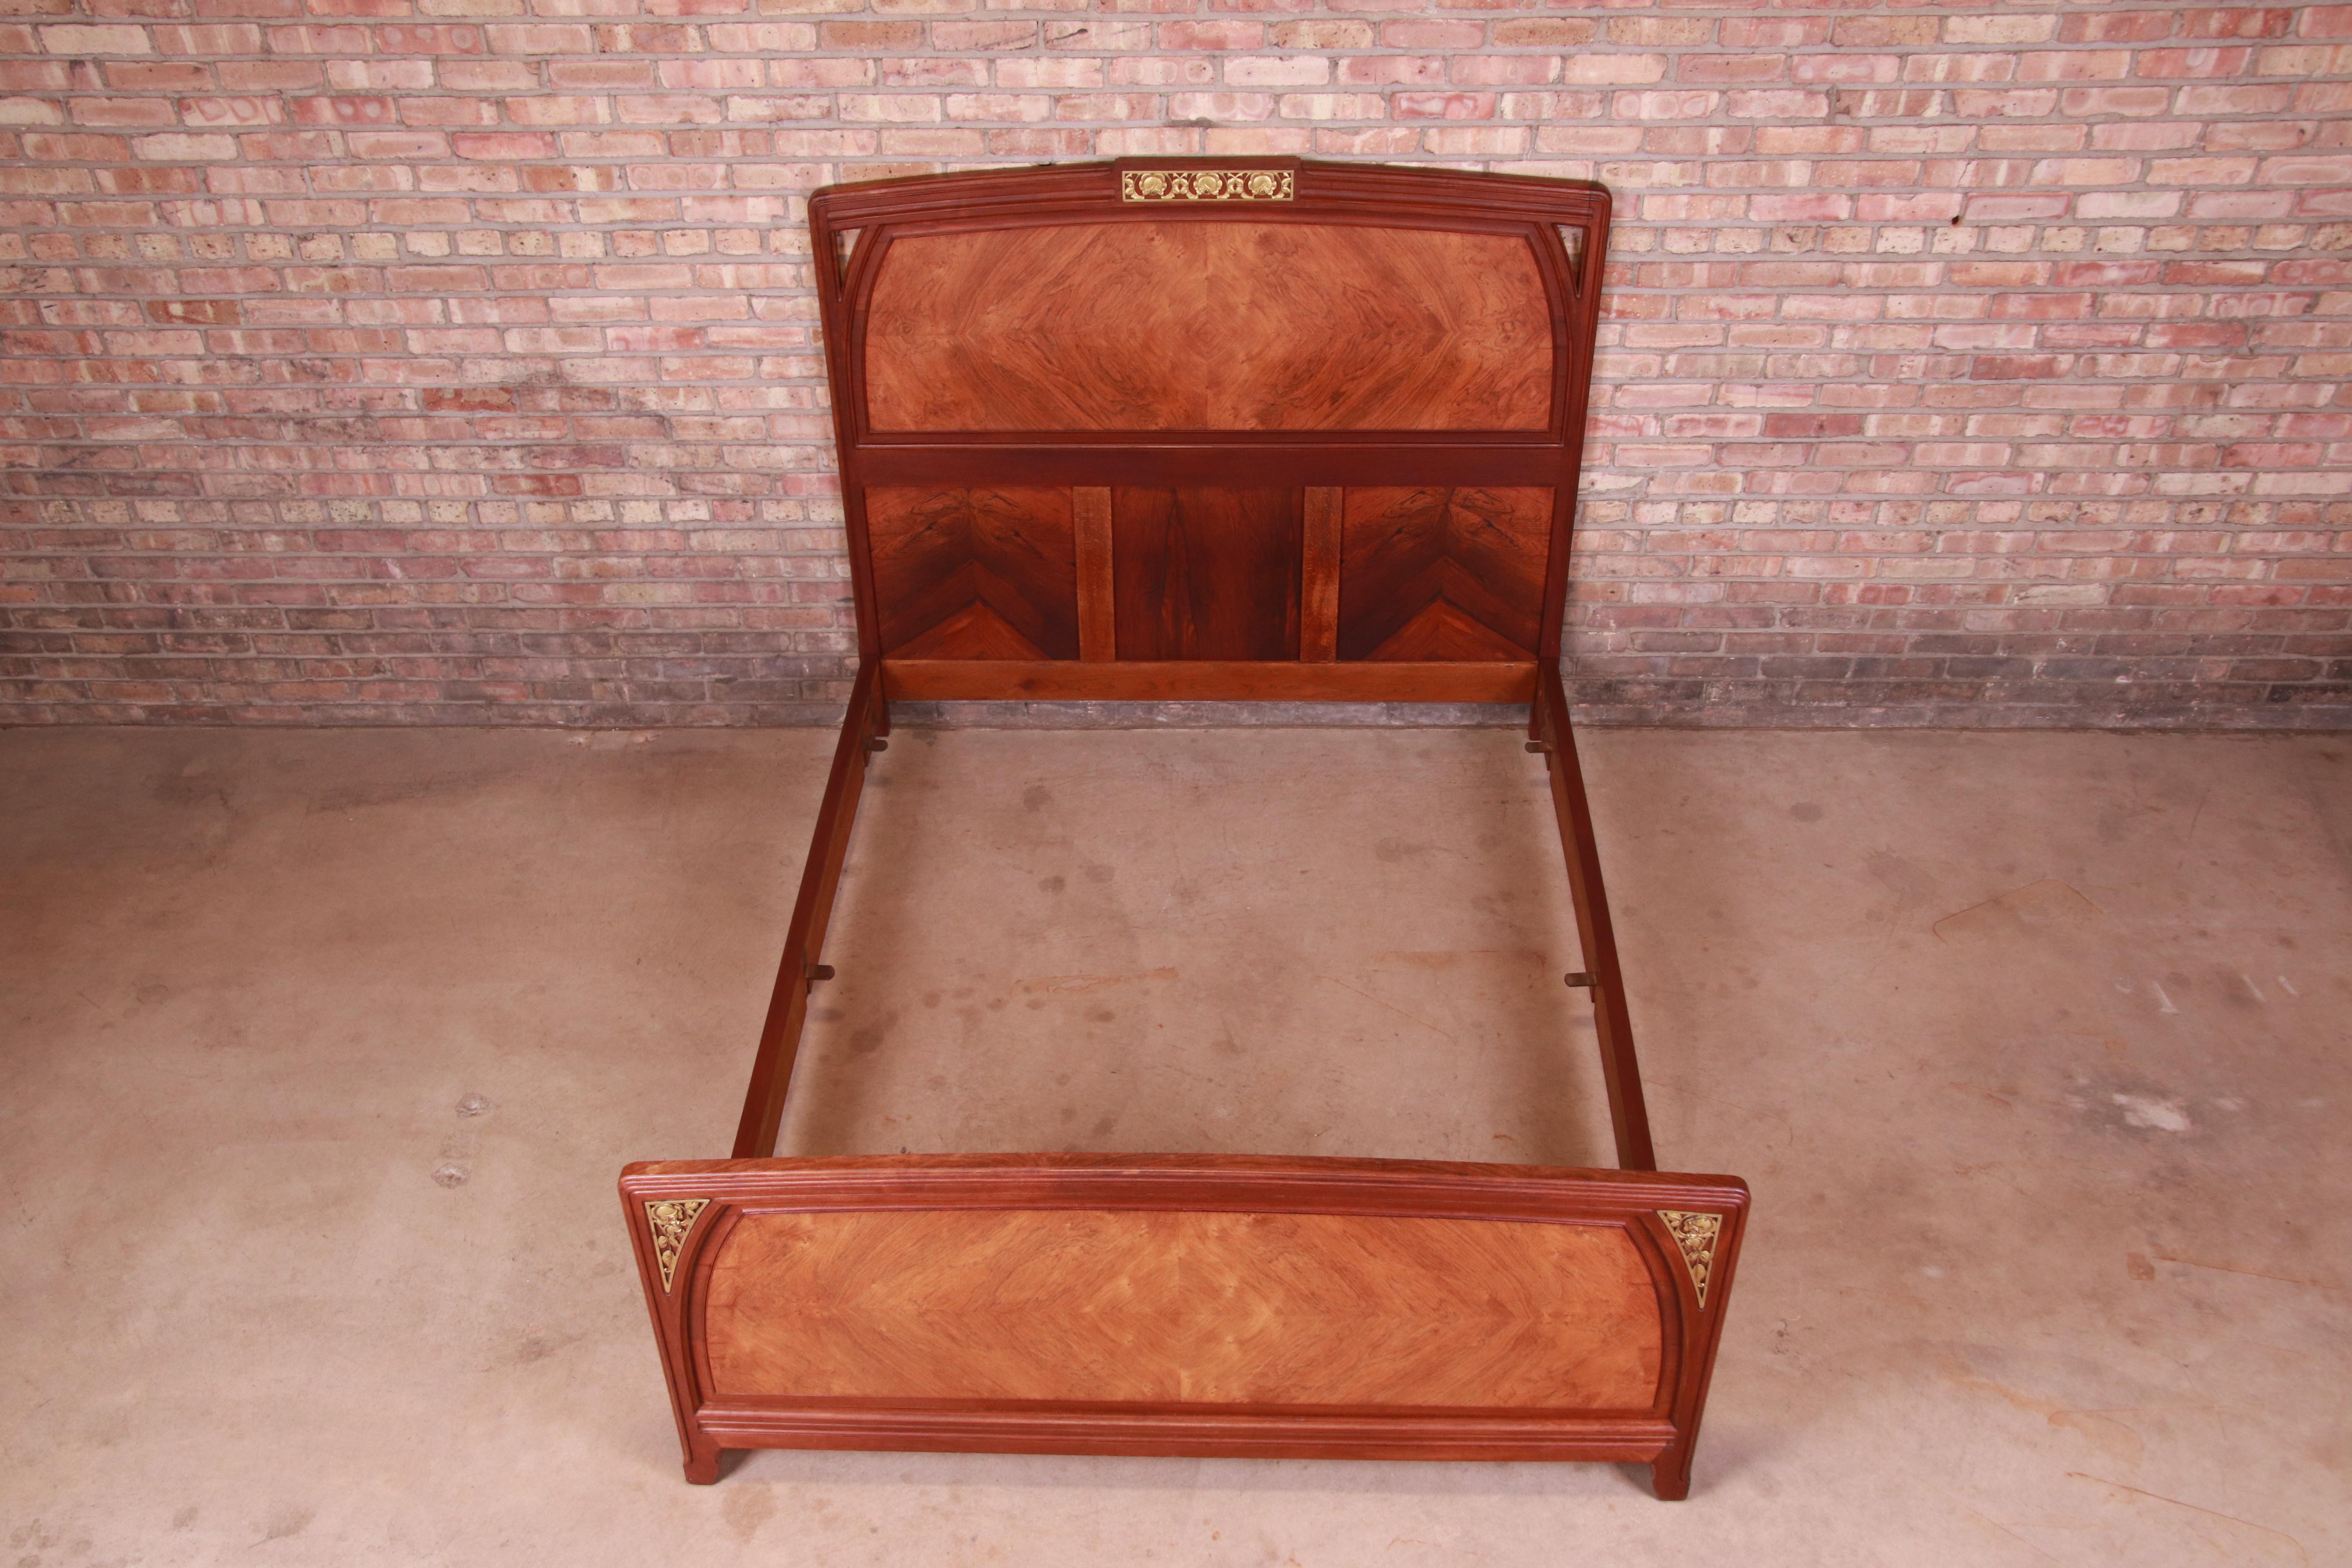 20th Century French Art Nouveau Rosewood and Mounted Bronze Queen Size Bed, Circa 1900